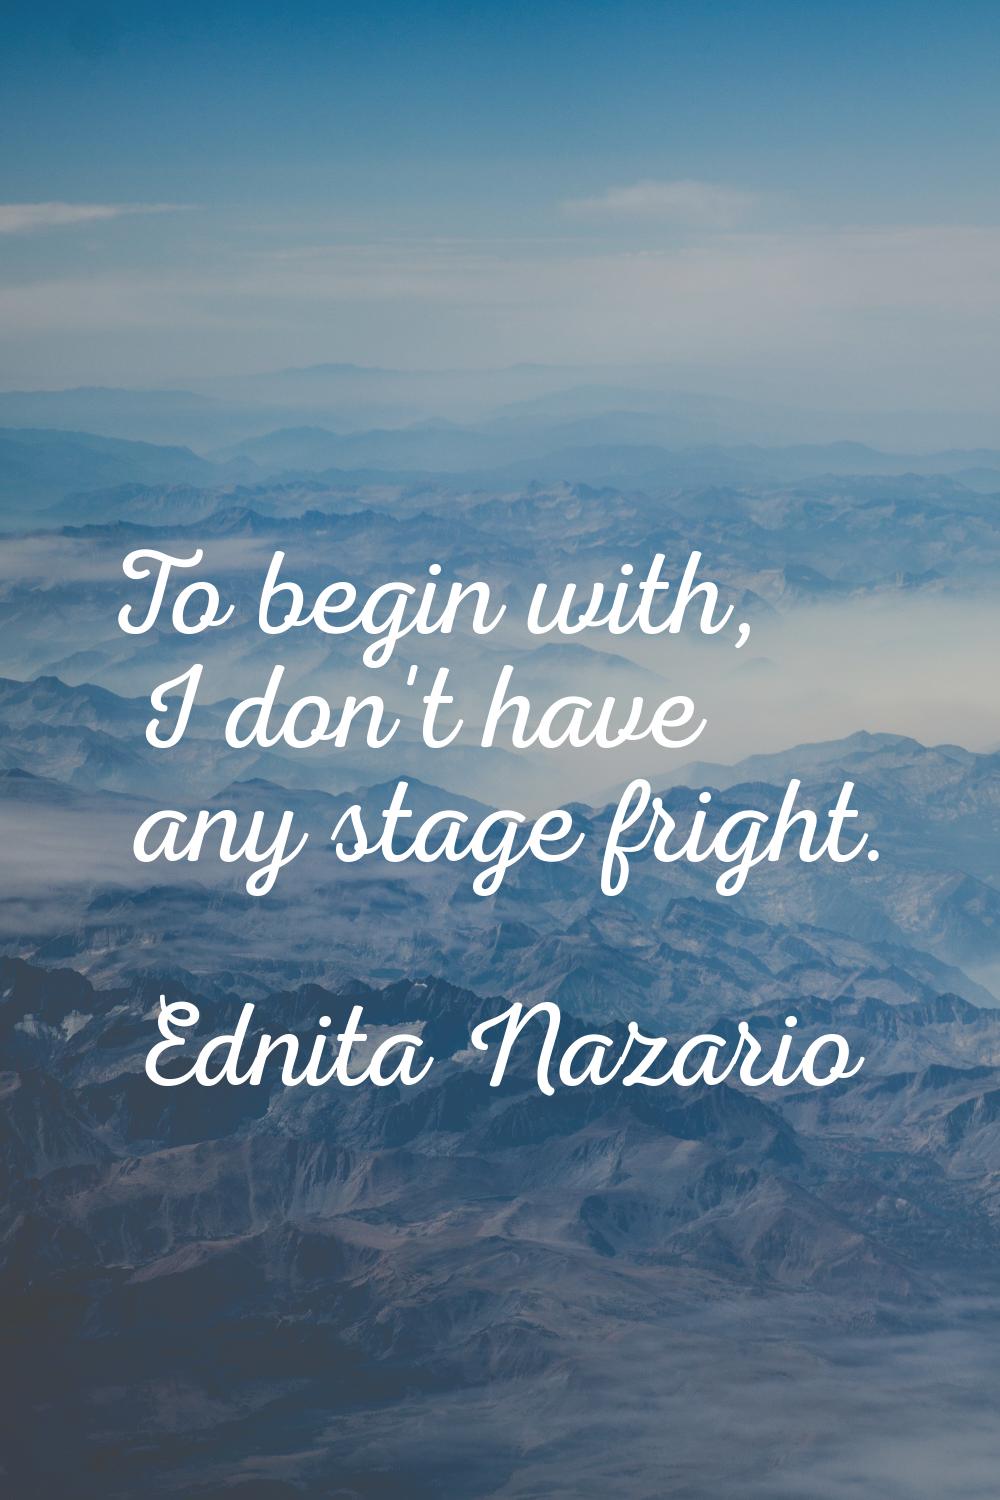 To begin with, I don't have any stage fright.